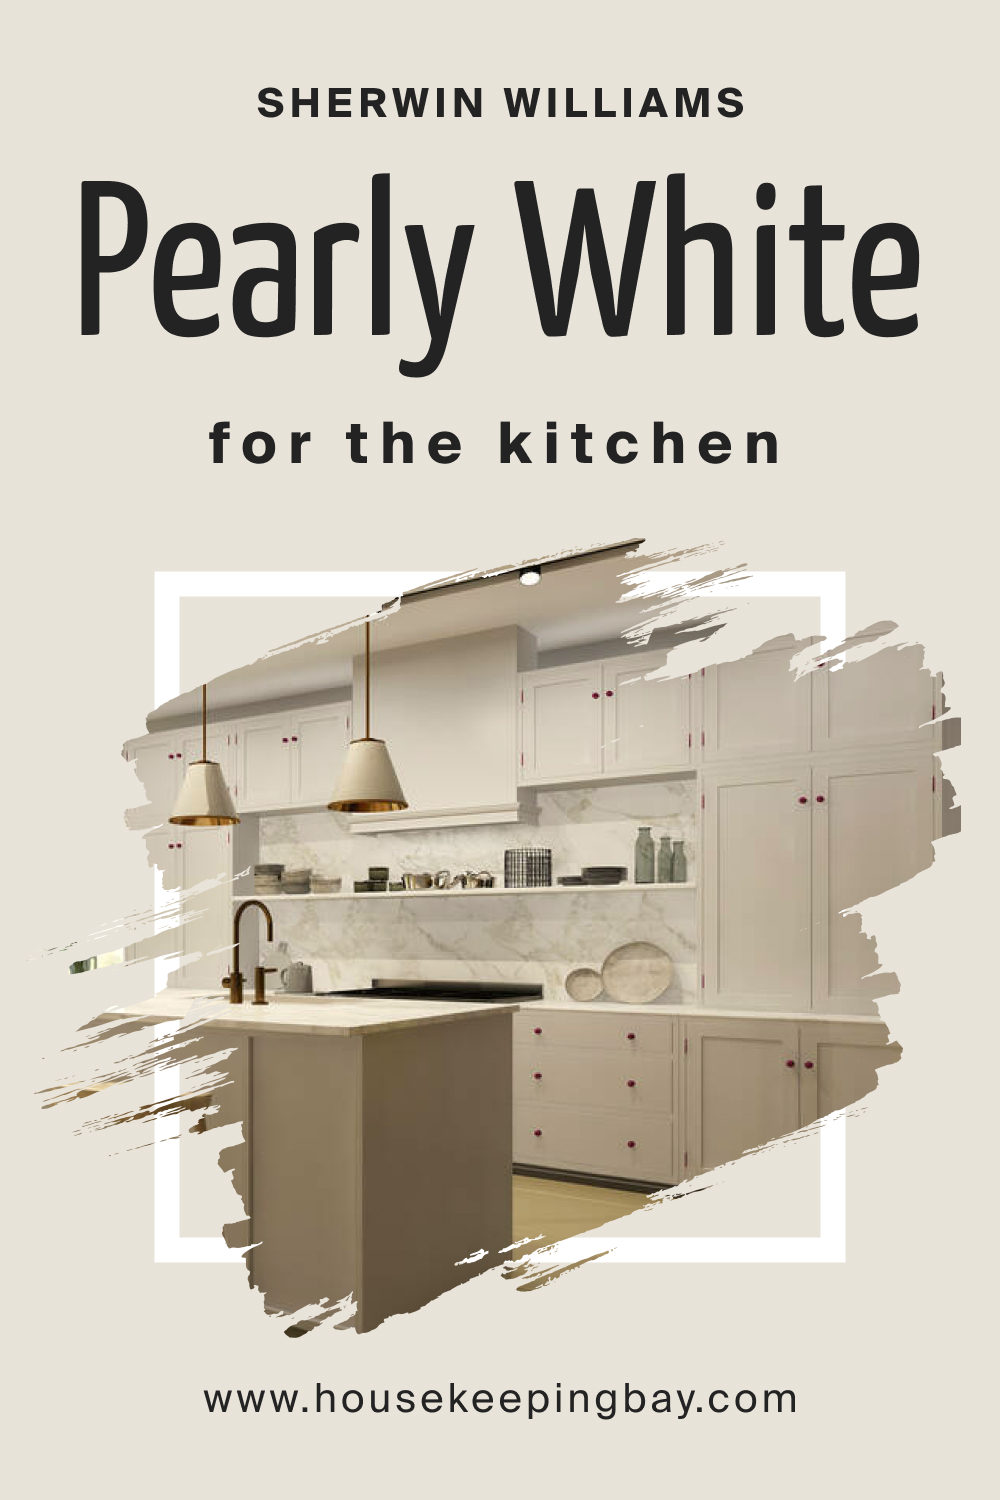 Sherwin Williams. SW Pearly White For the Kitchen